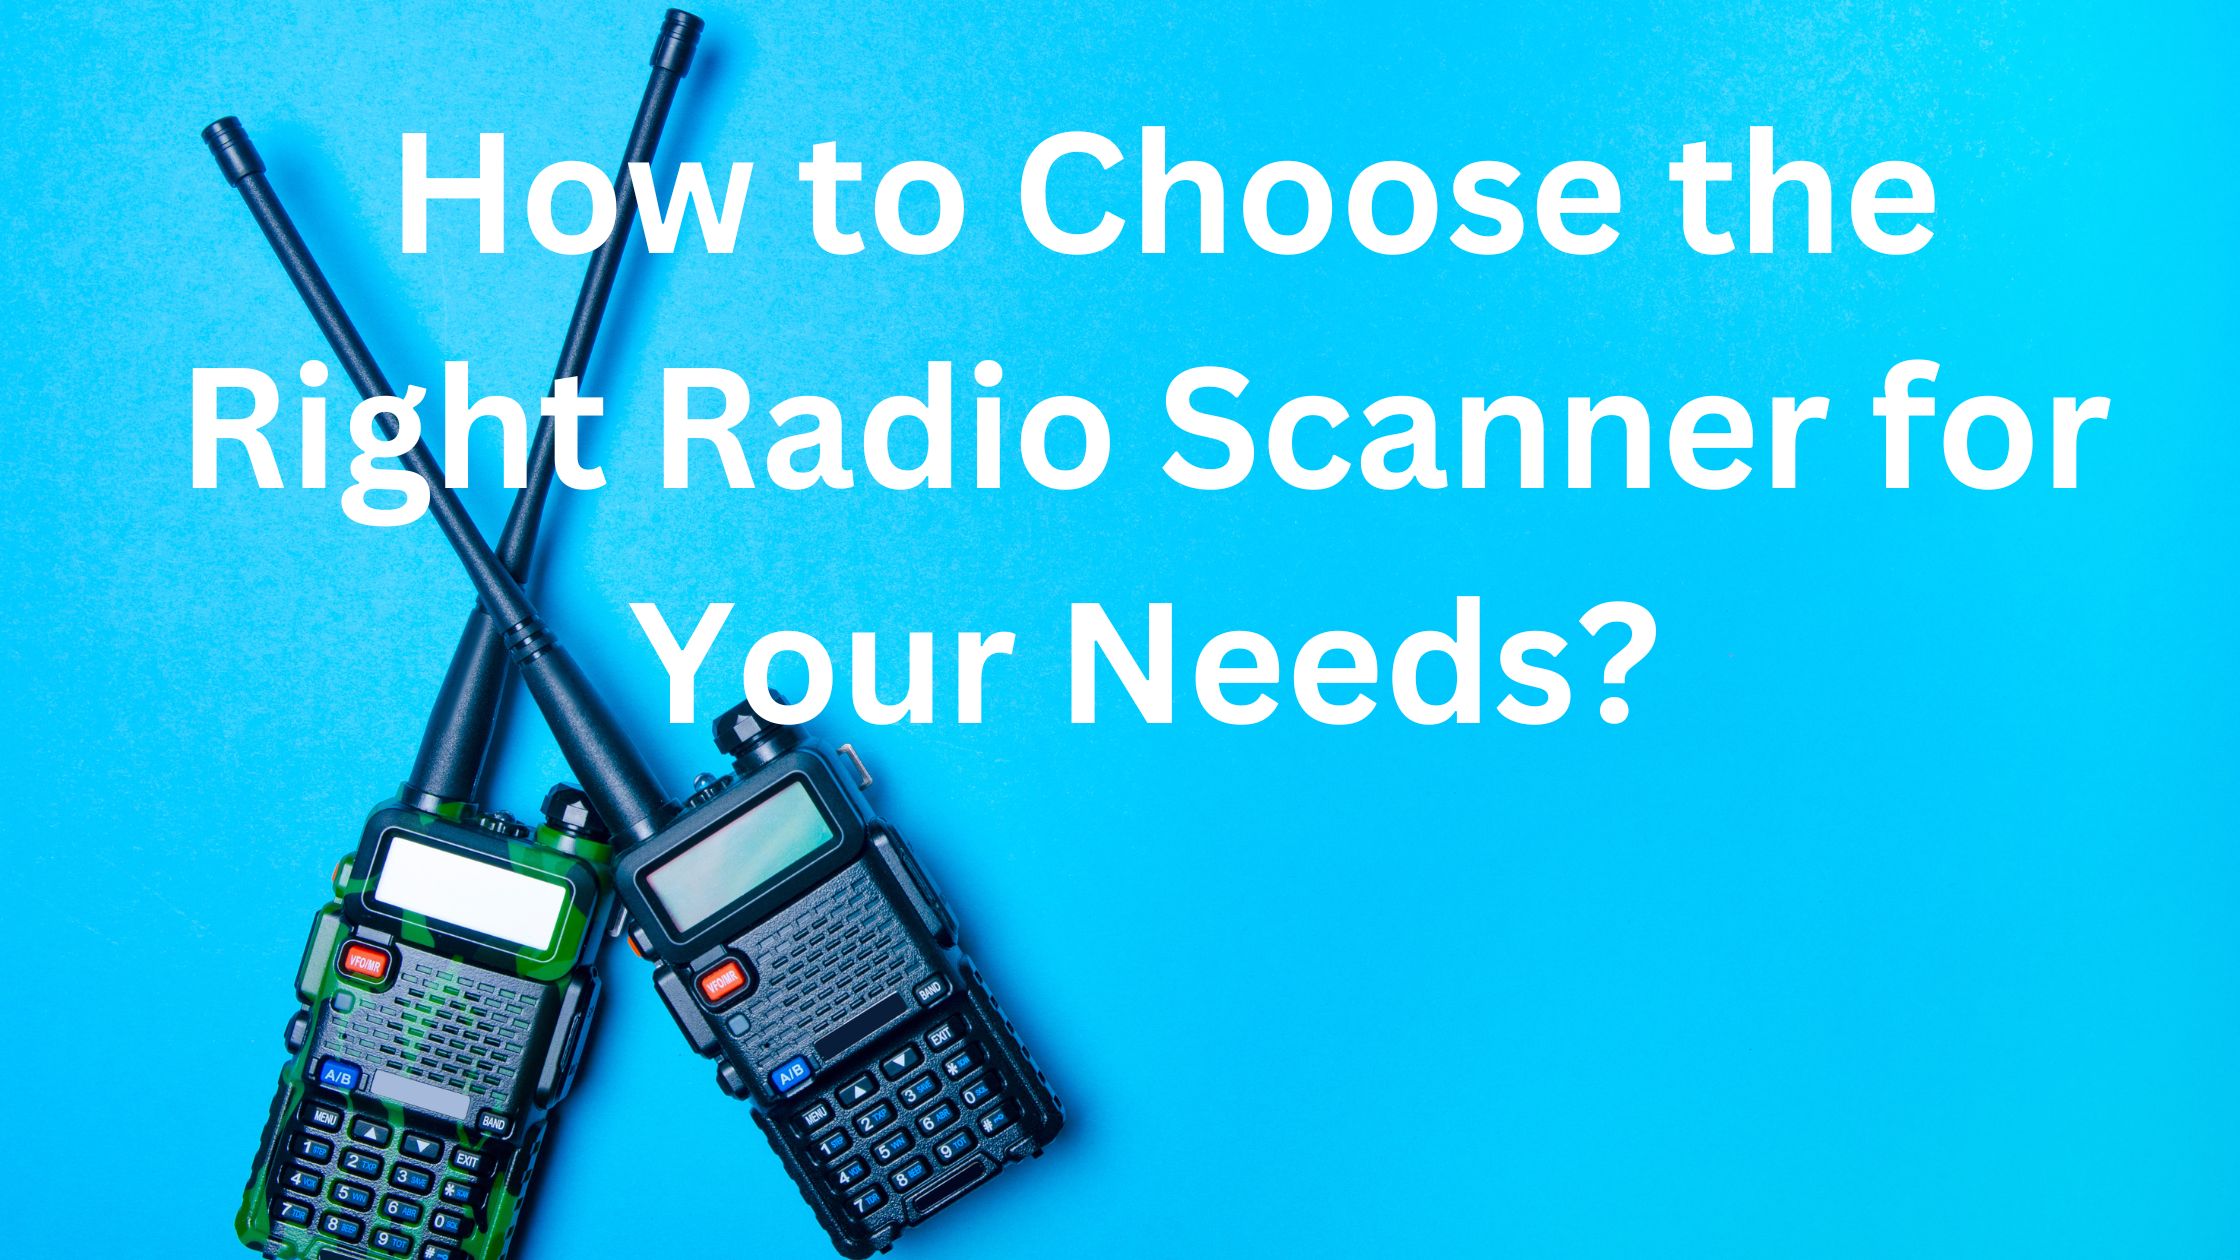 How to Choose the Right Radio Scanner for Your Needs